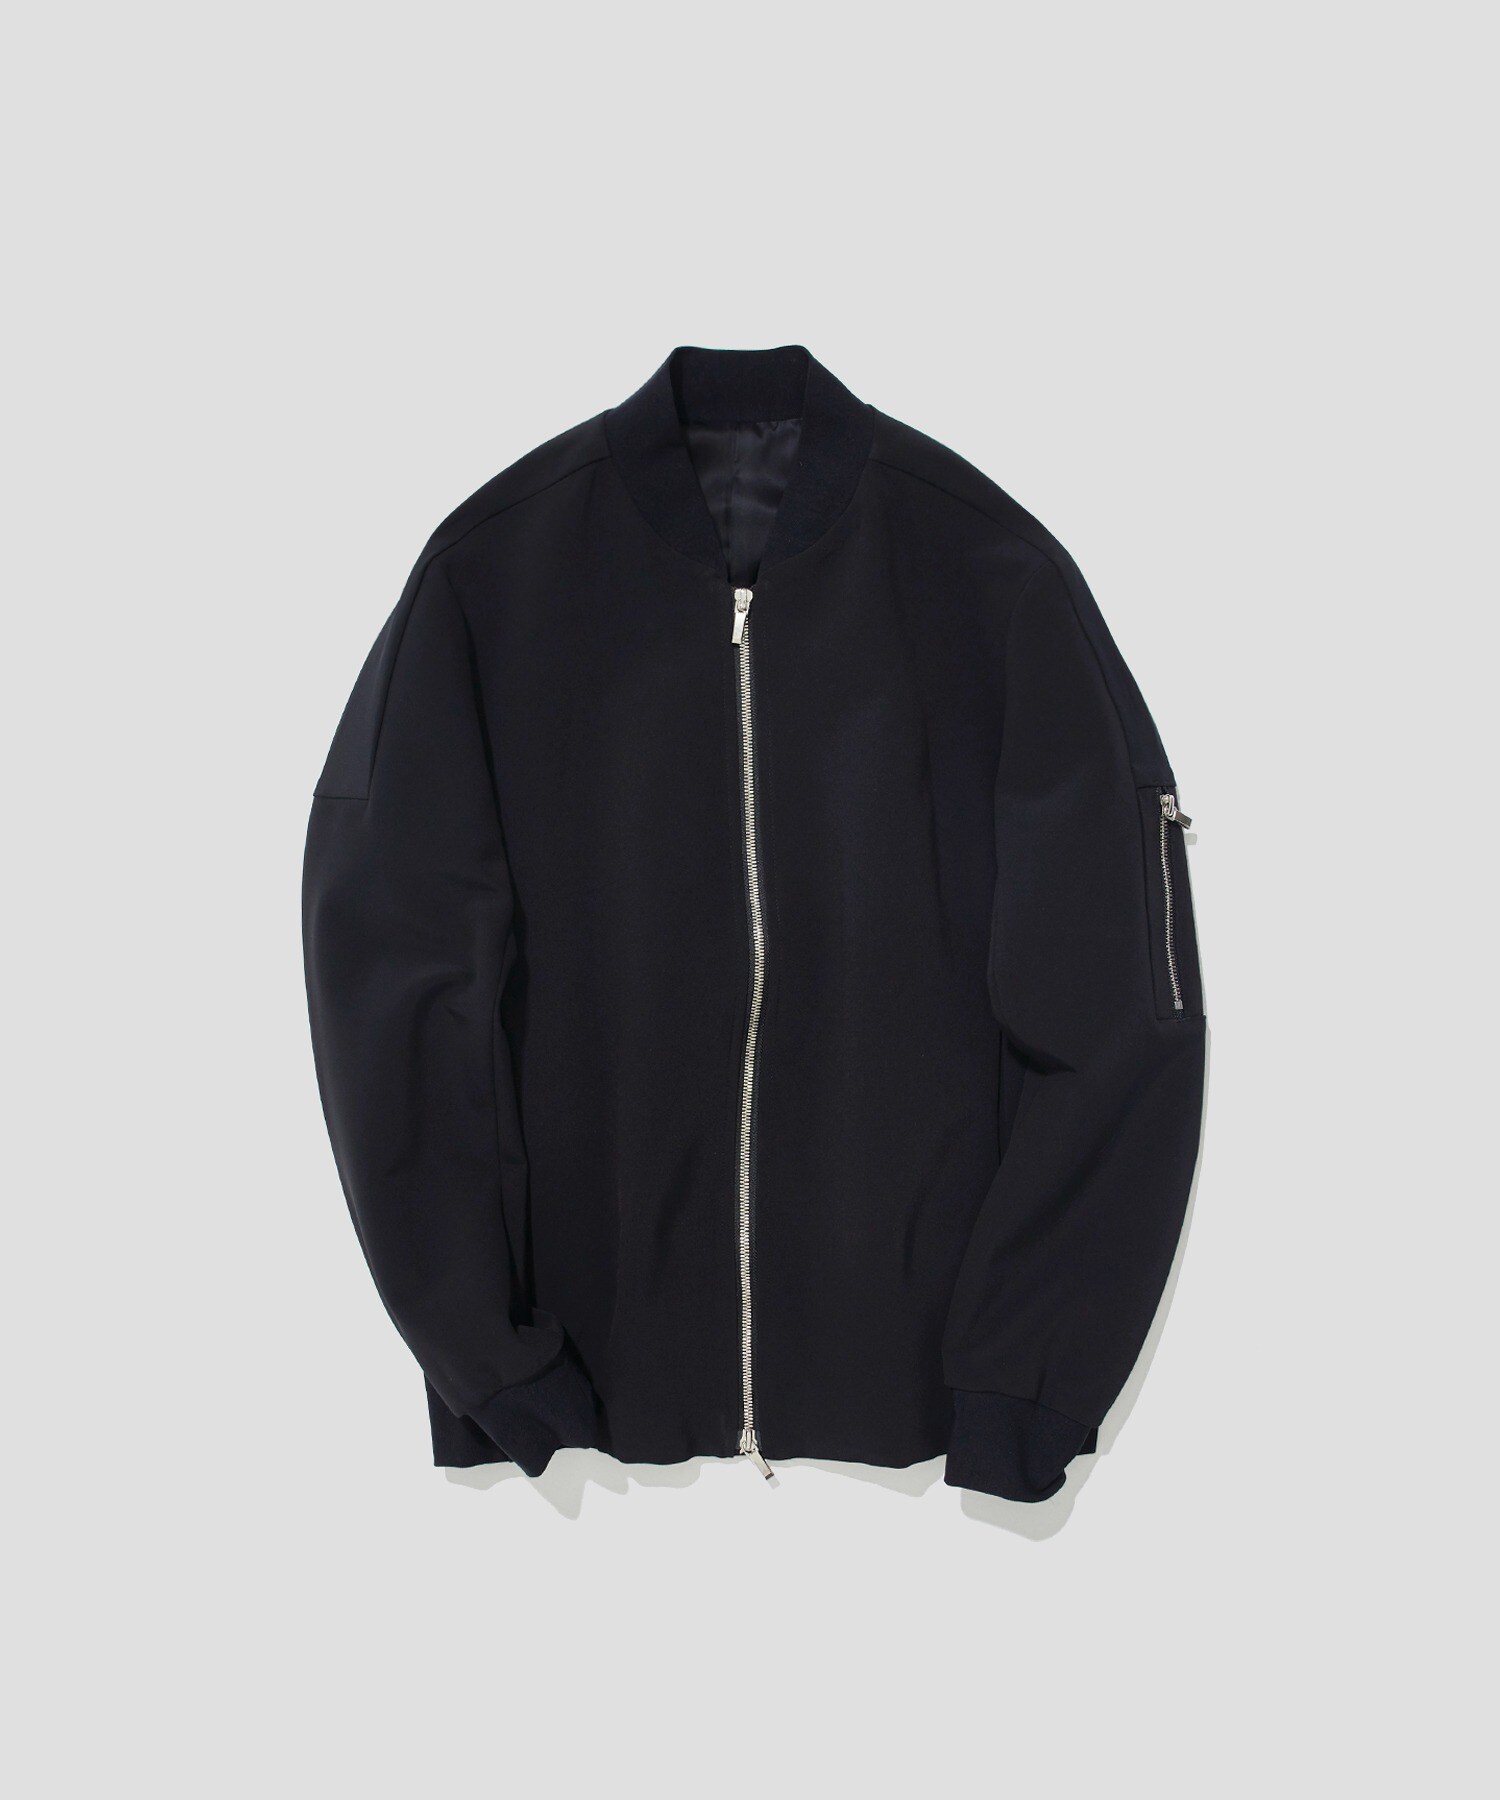 DOUBLE FACE BOMBER JACKET ATTACHMENT